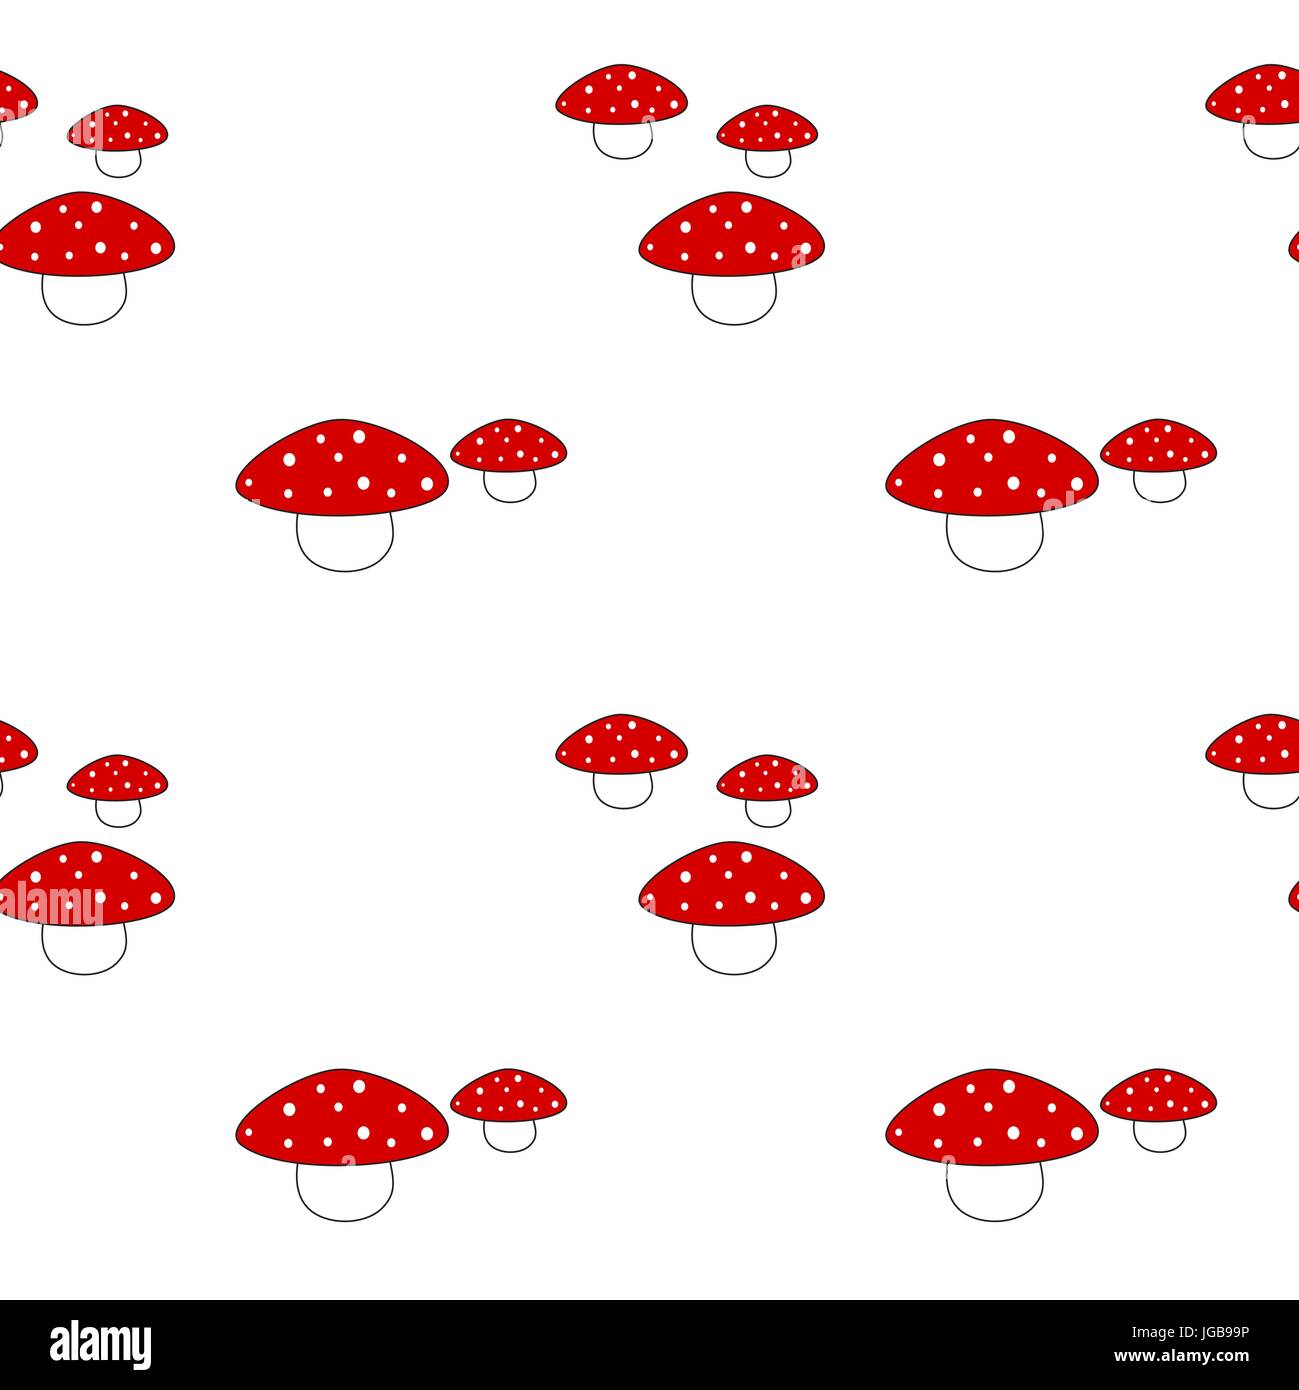 Download Adorable Kawaii Mushroom in a Magical Forest Wallpaper  Wallpapers com